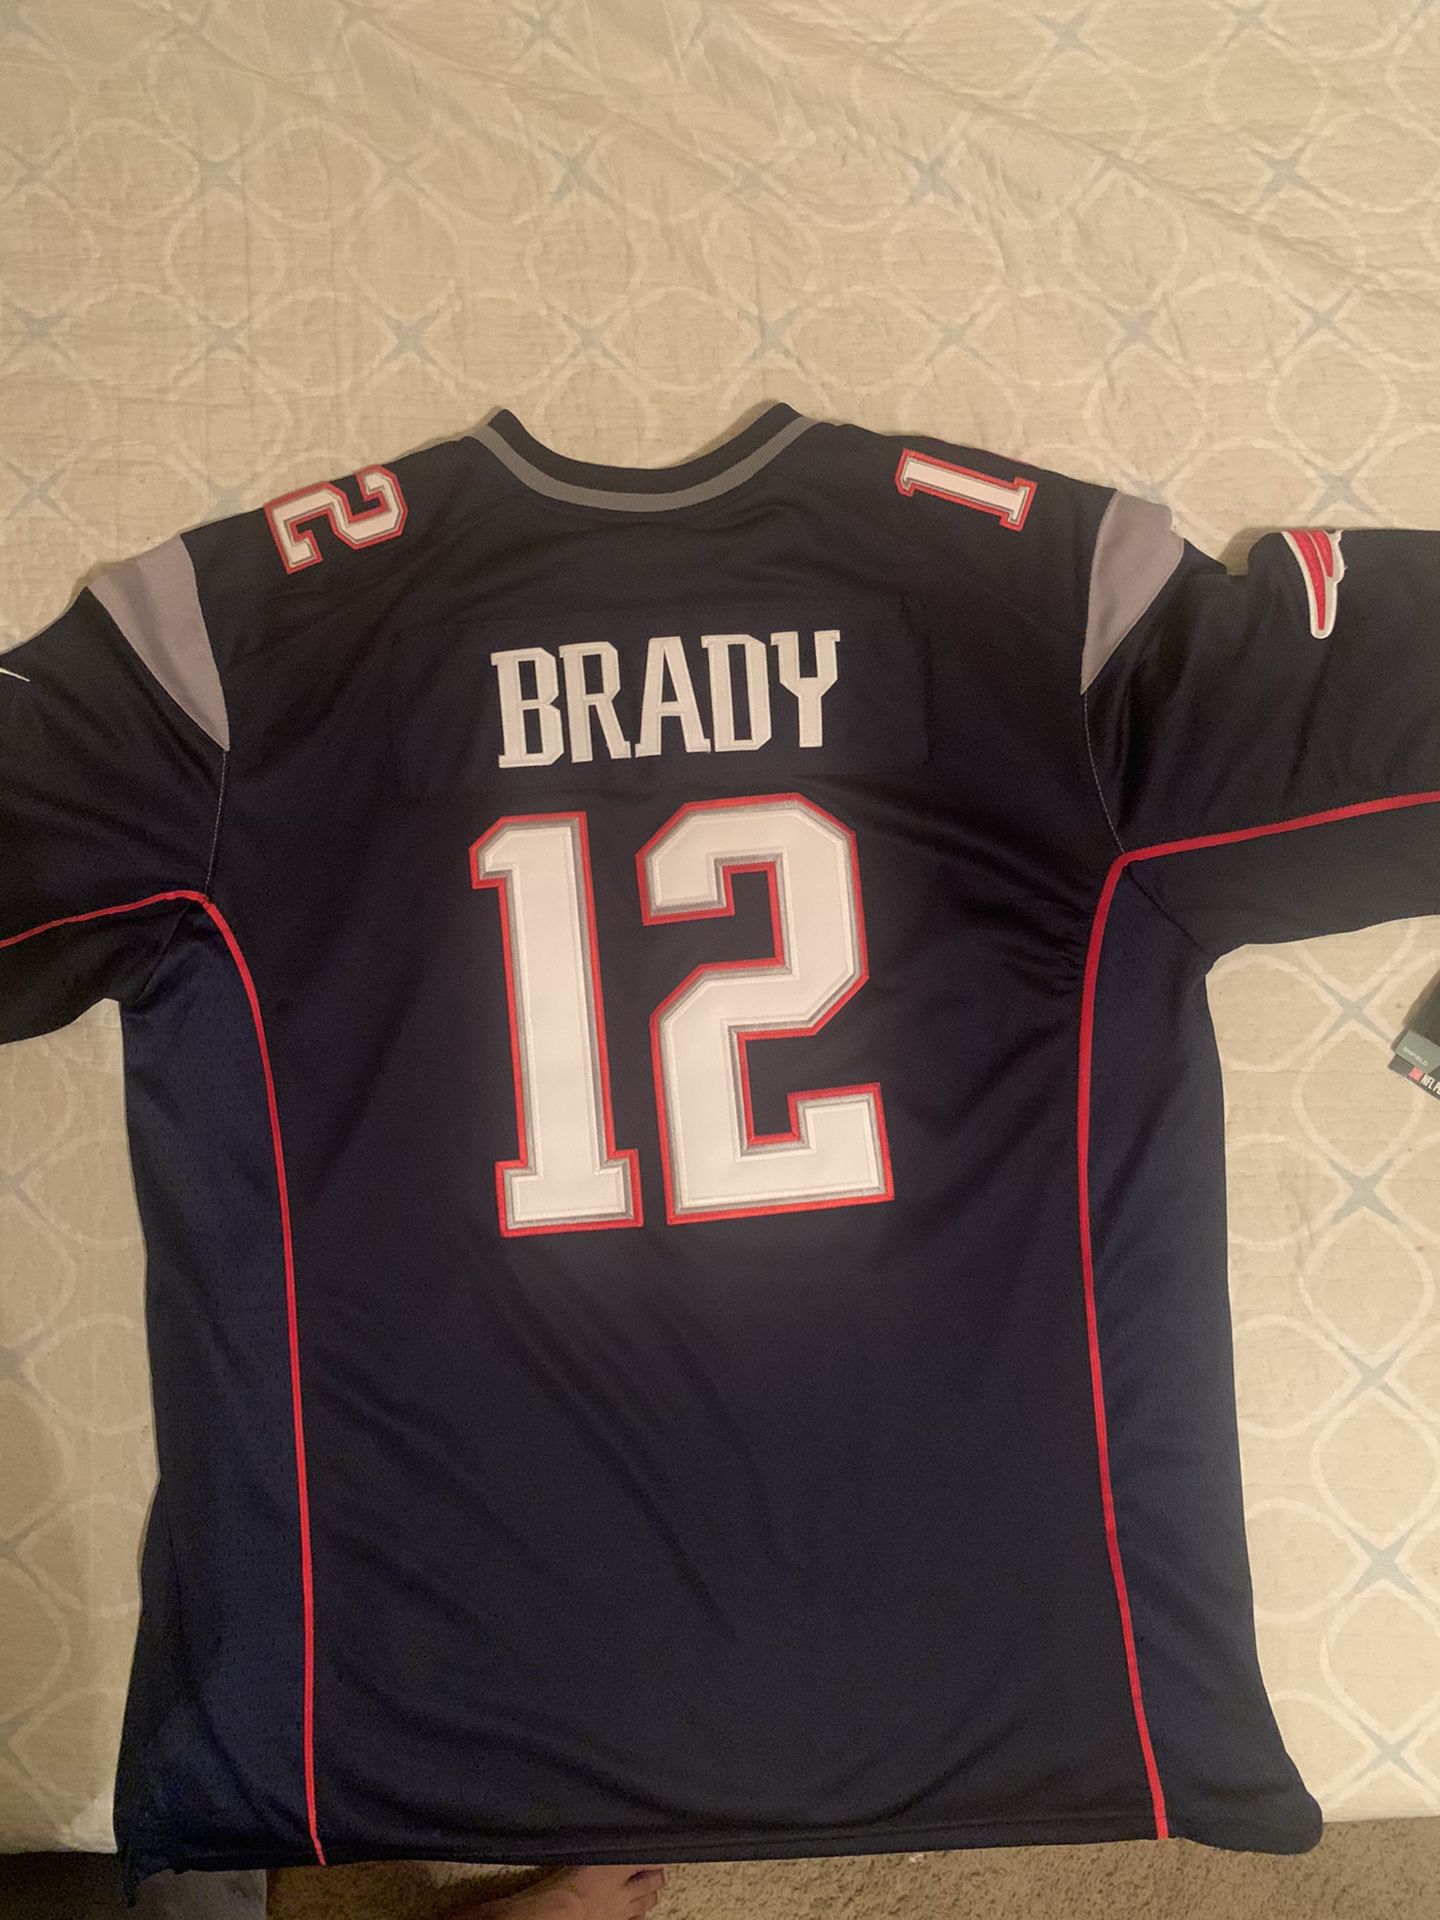 New England Patriots Game Jersey - L - Brand new